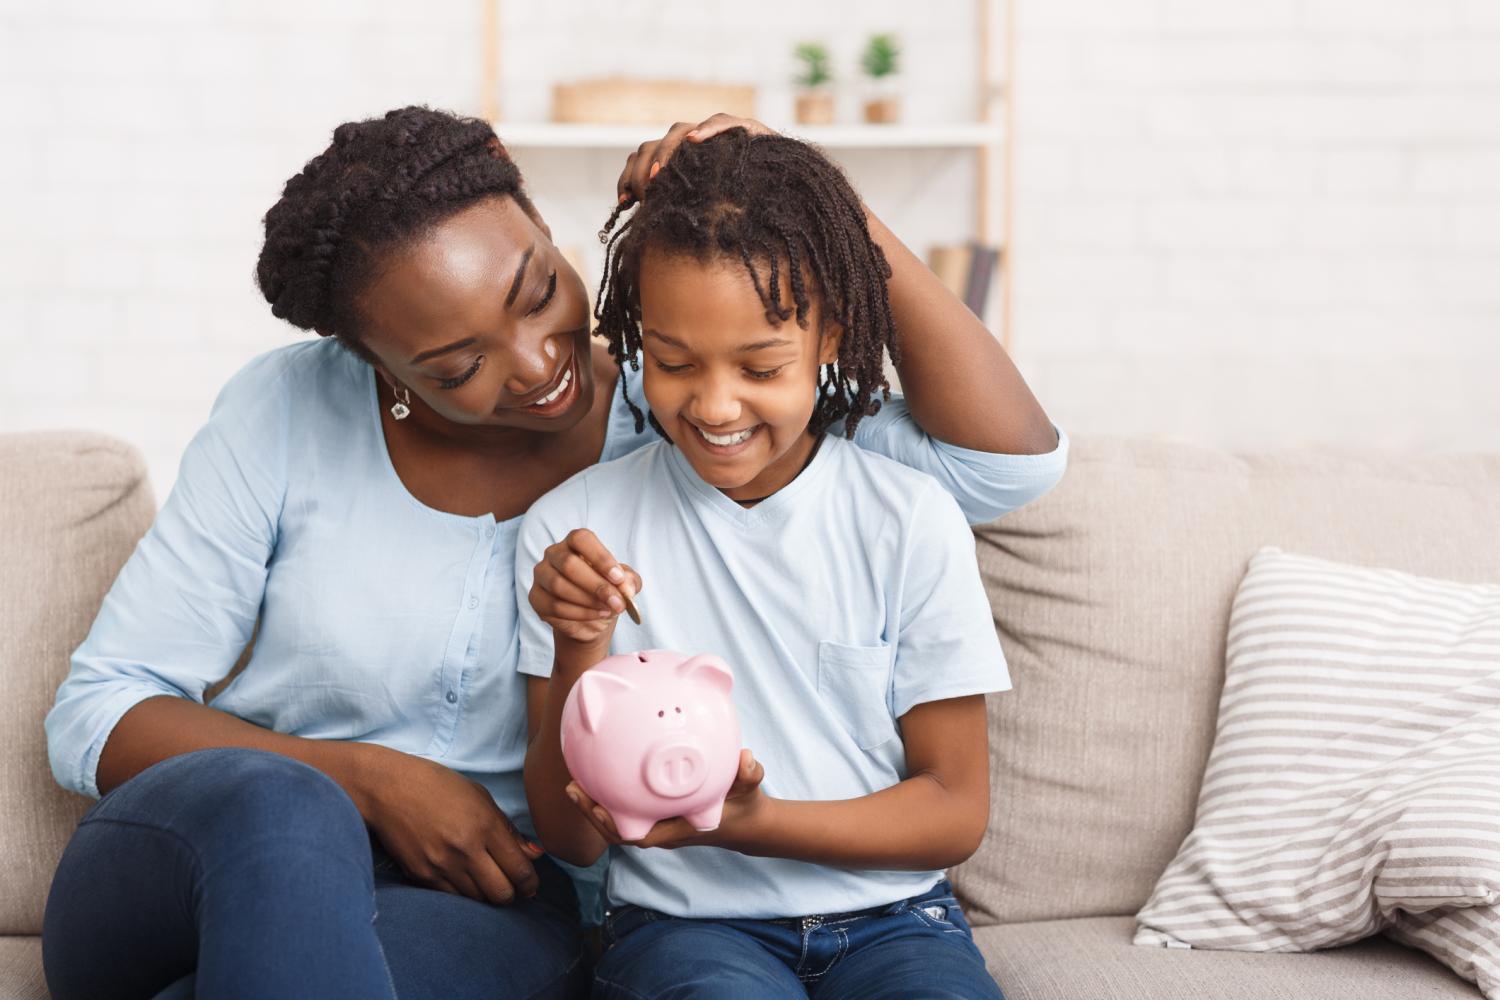 Black Mother And Daughter Putting Coins Into Piggy Bank At Home.